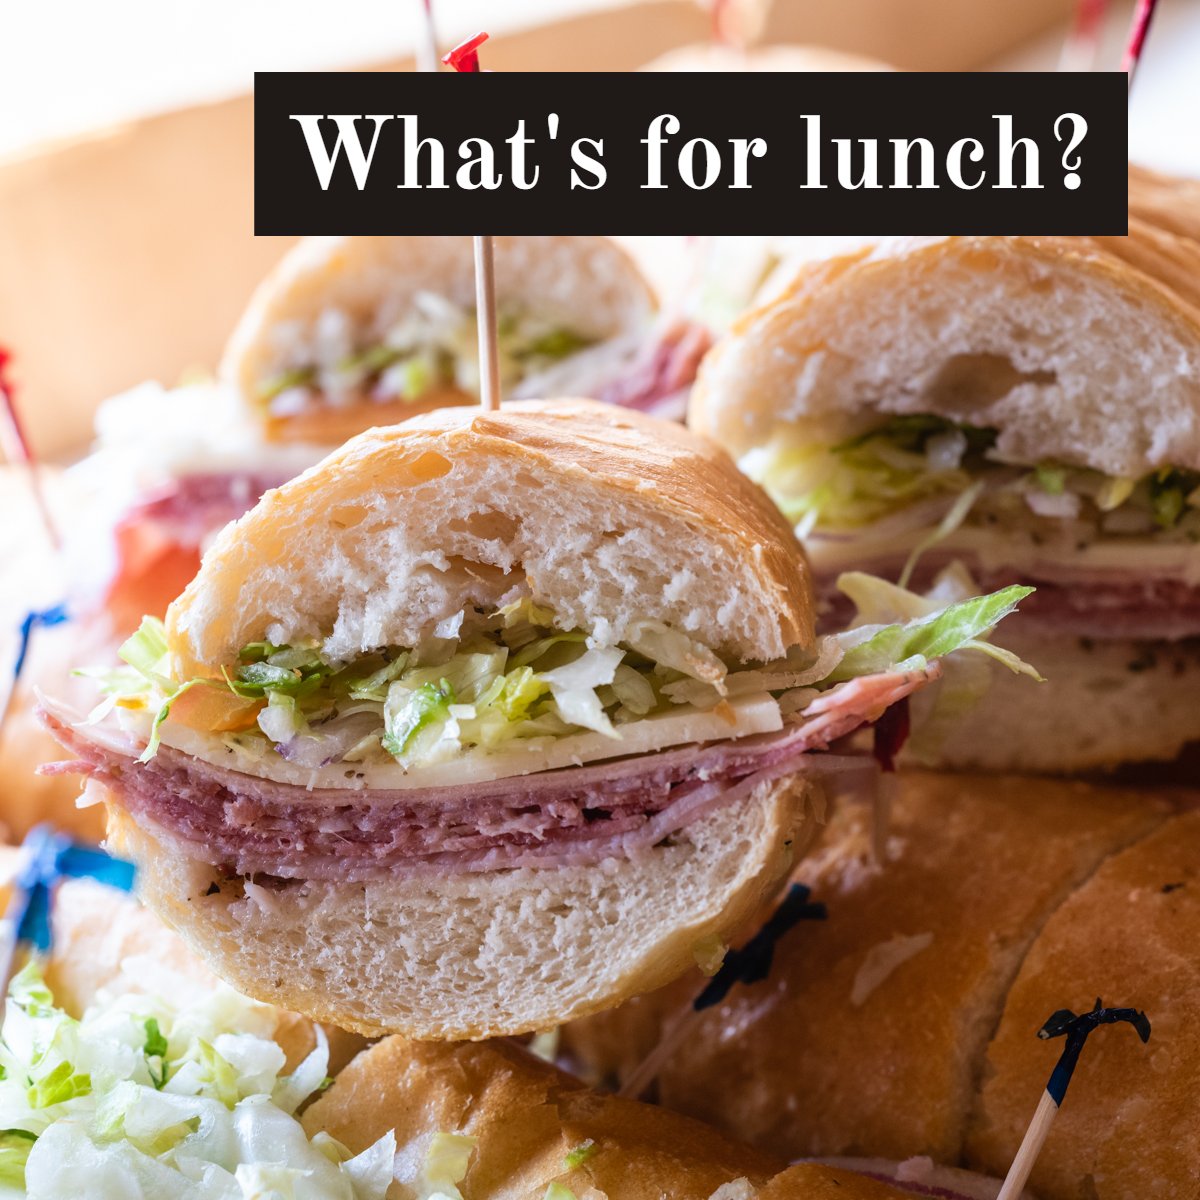 Running out of lunch ideas? Take a break from your usual midday meal, and treat yourself to one of our Italian sandwiches! #TheOriginalNottoliAndSon #LunchIdeas #ItalianSandwich #ChicagoBites